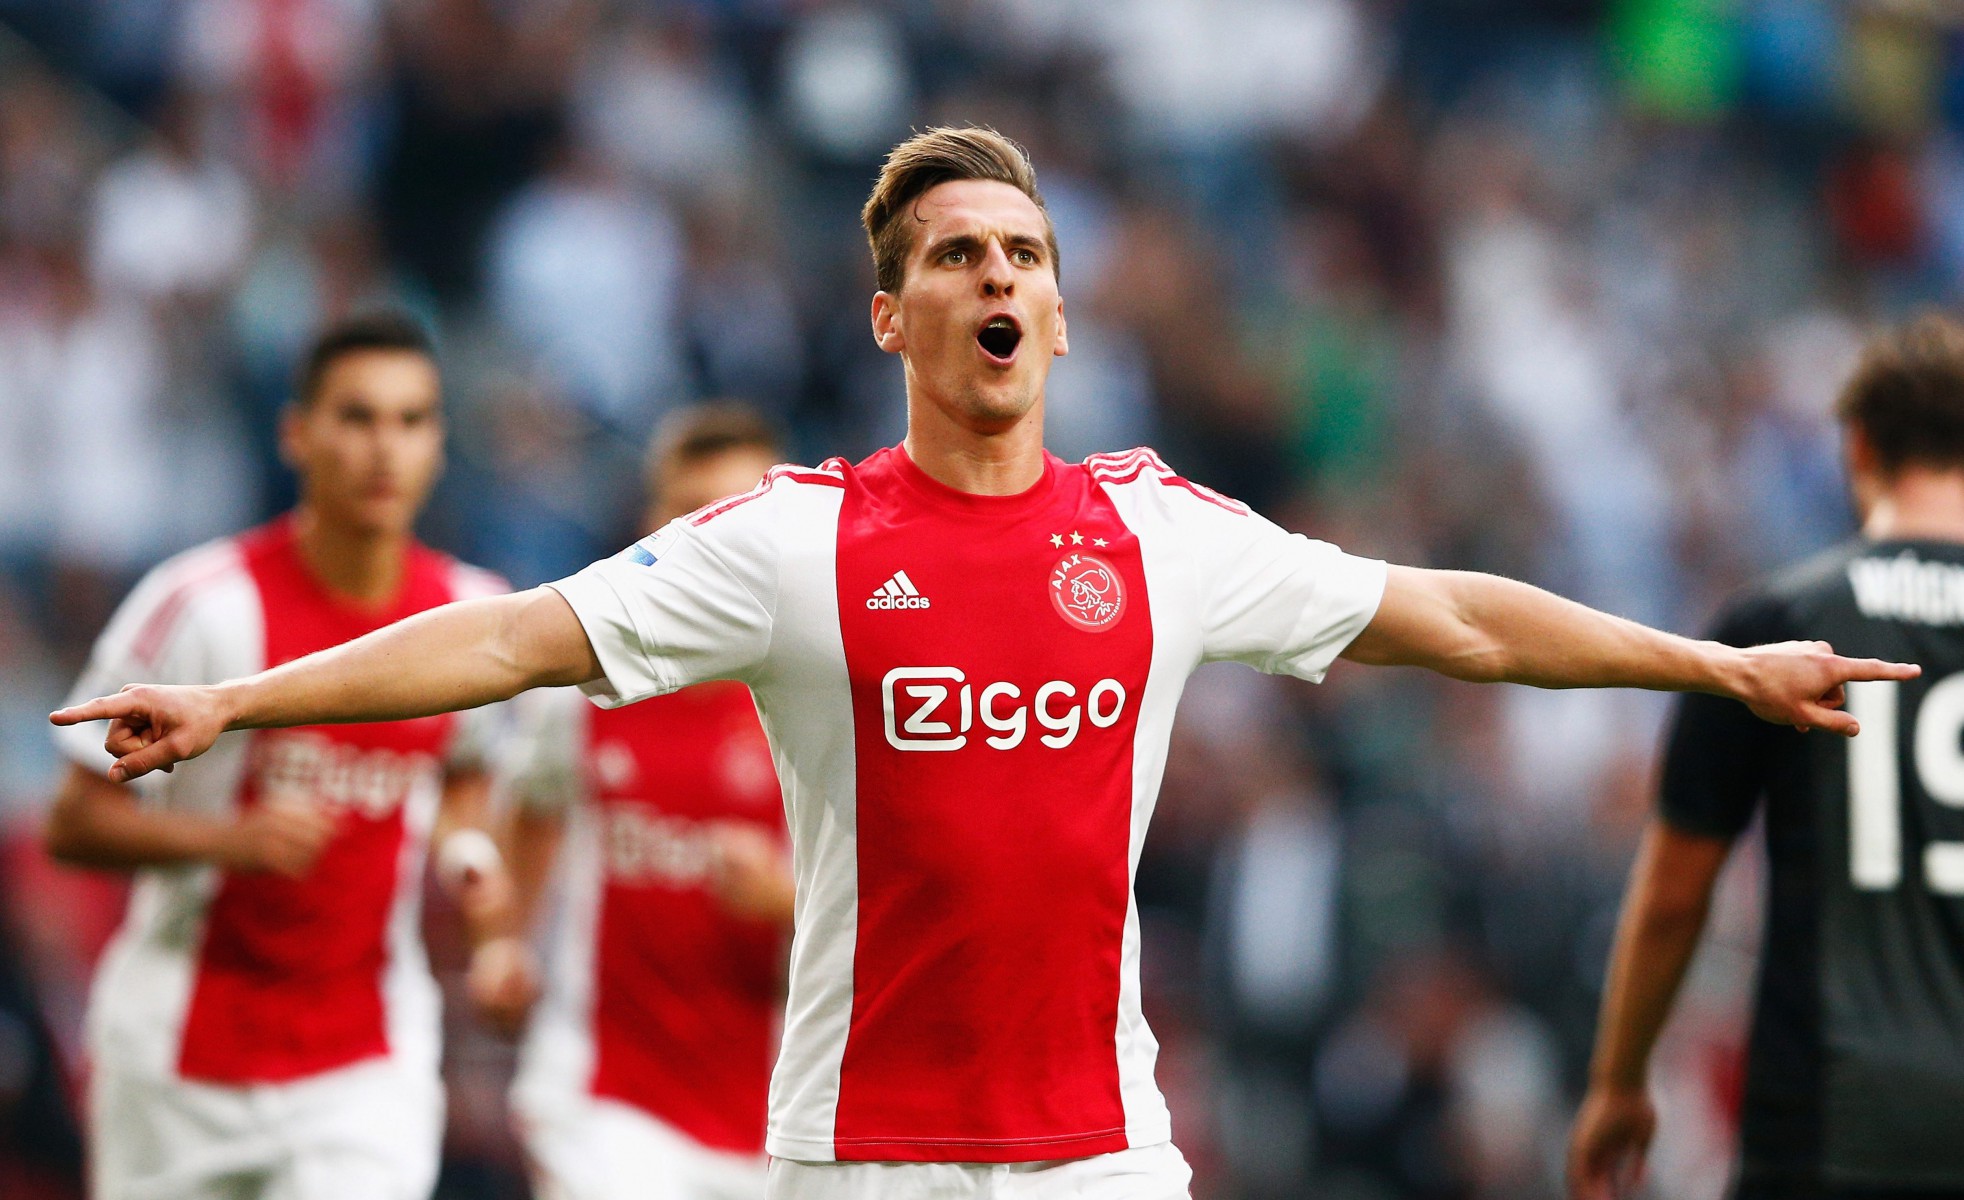 At Ajax Milik found his feet after disappointment at Bayer Leverkusen